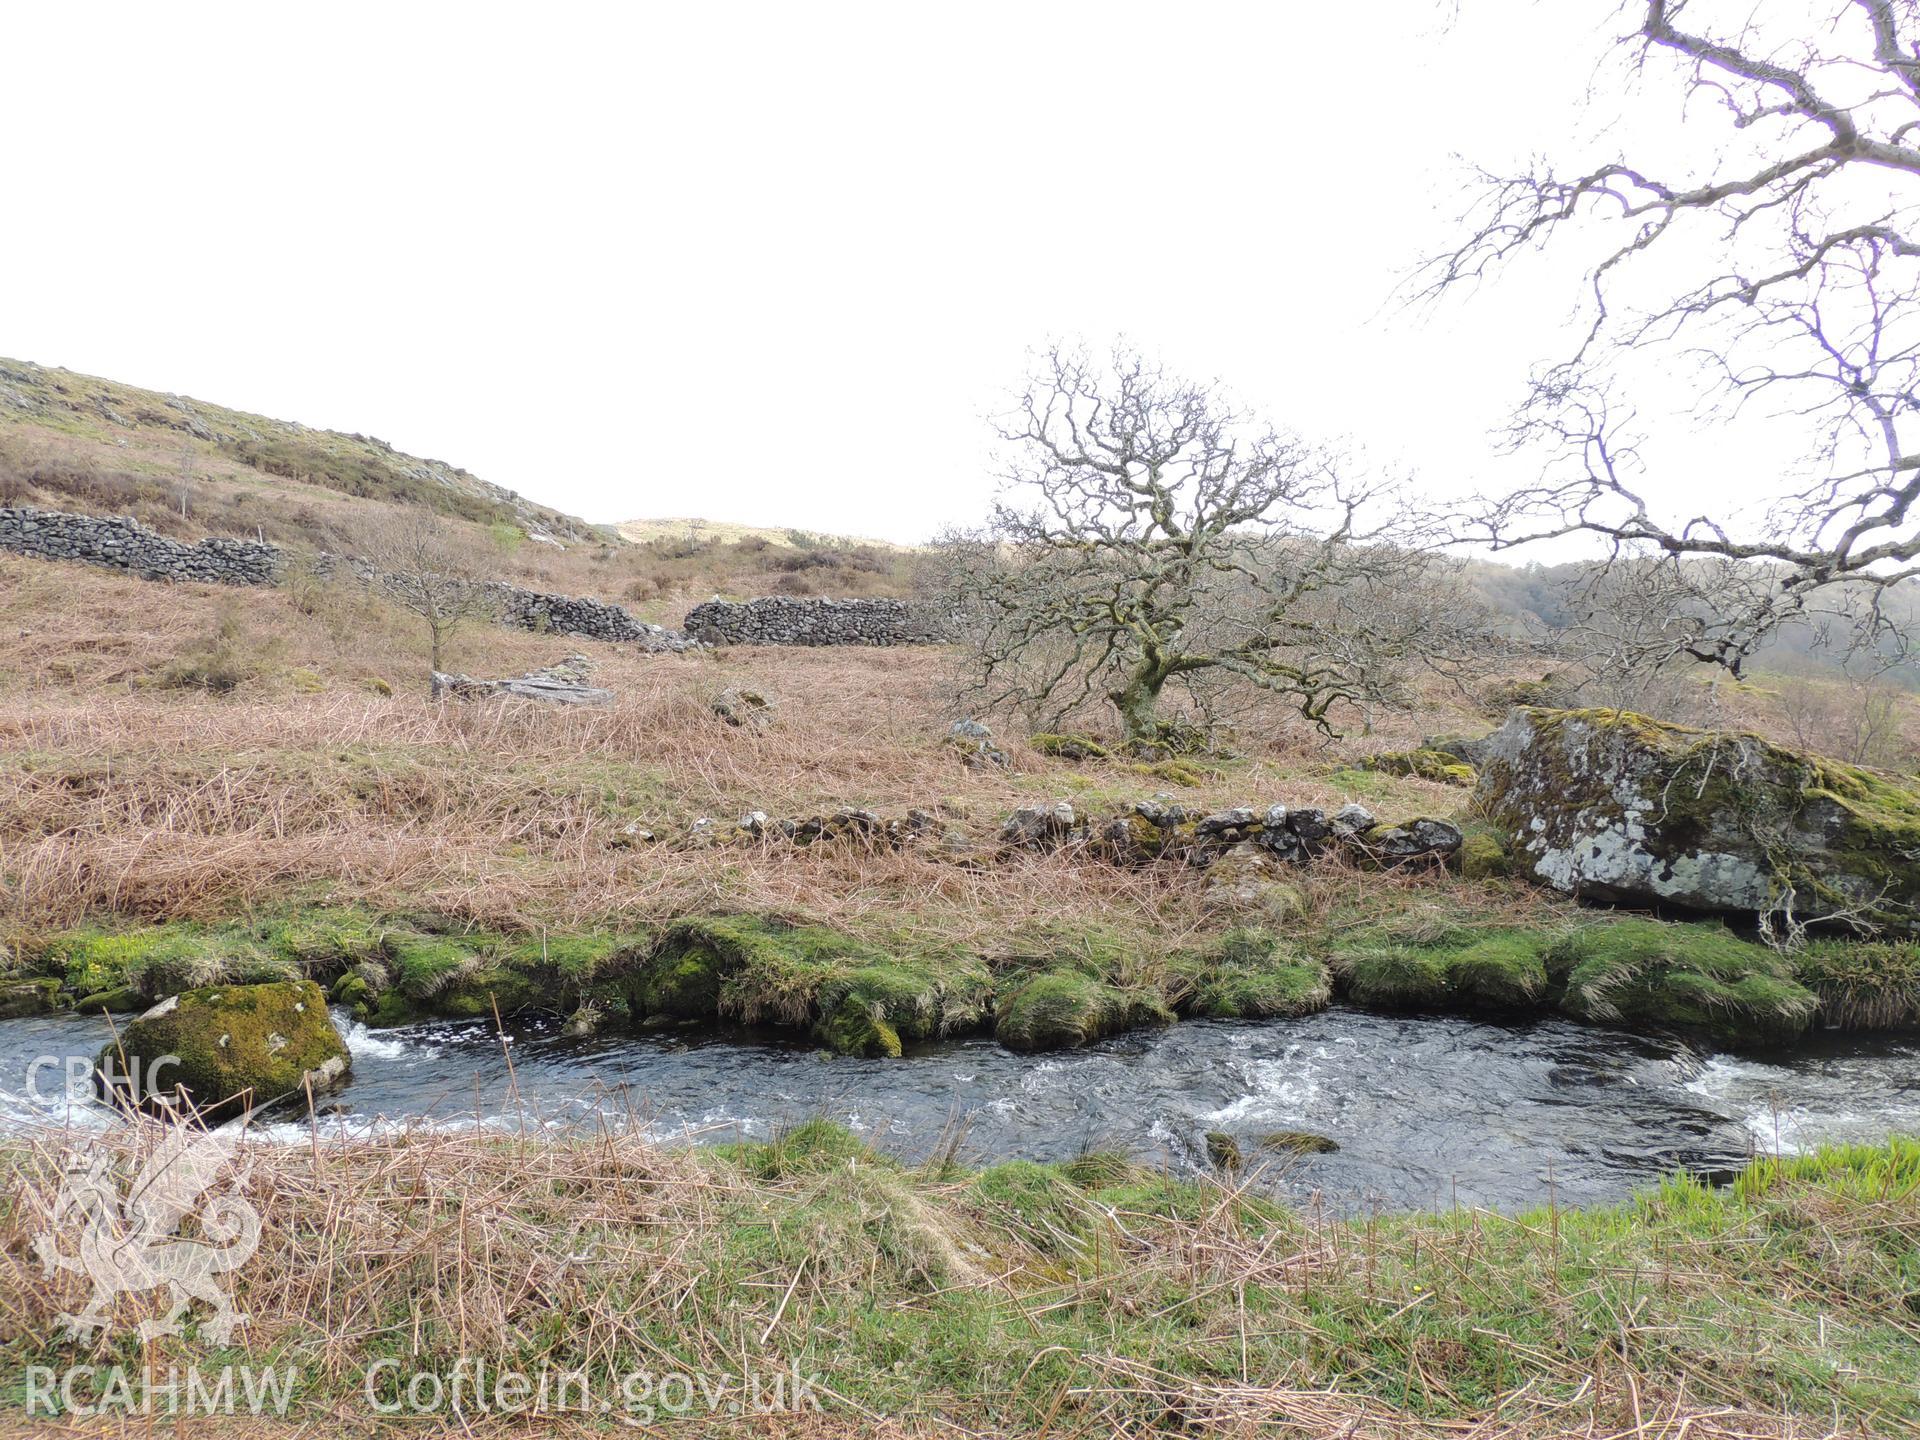 'View east from Turbine House area.' Photographed as part of desk based assessment and heritage impact assessment of a hydro scheme on the Afon Croesor, Brondanw Estate, Gwynedd. Produced by Archaeology Wales for Renewables First Ltd. 2018.